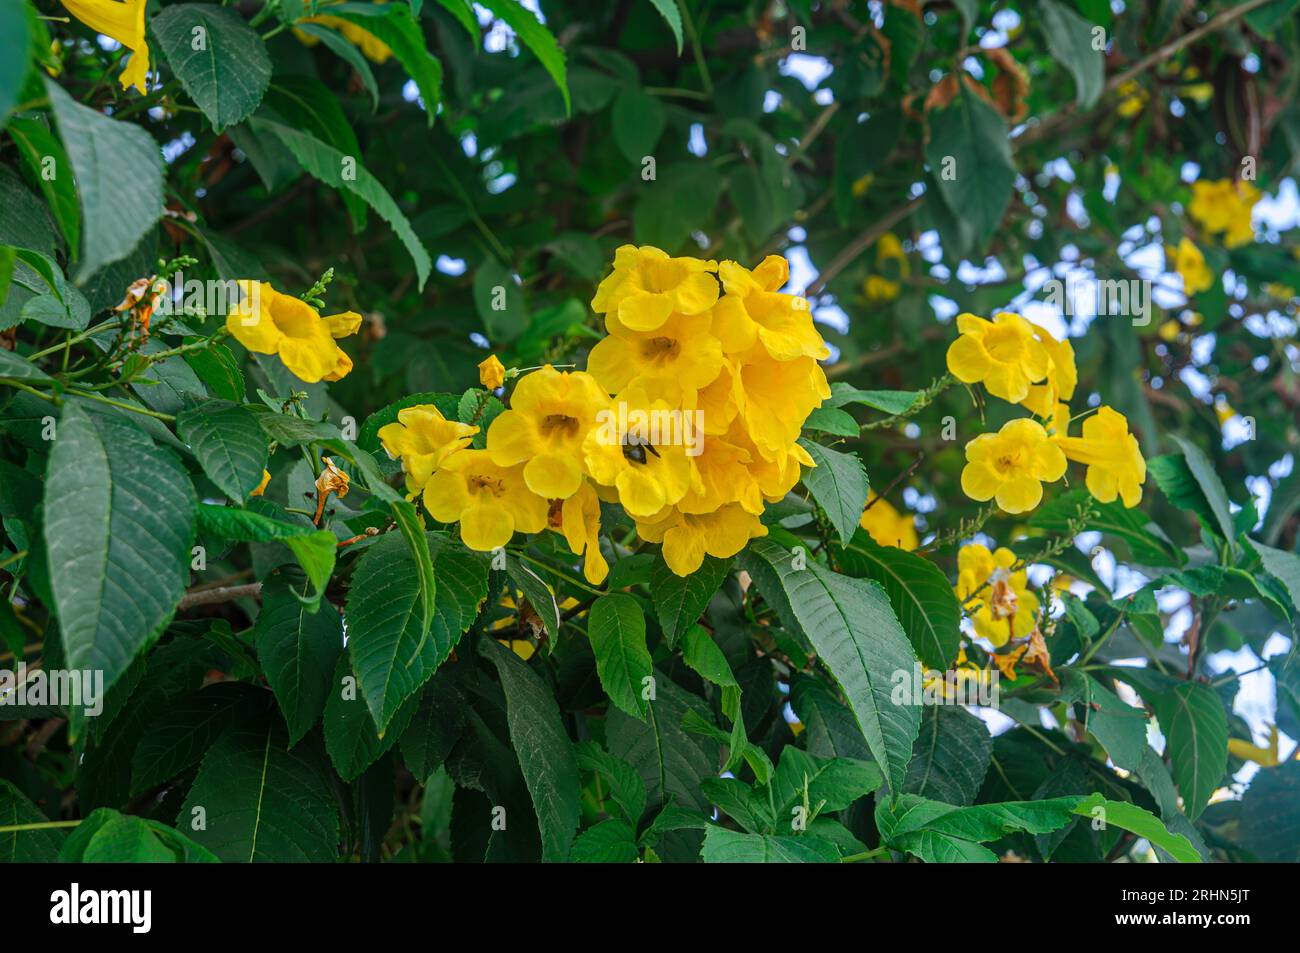 a bumble bee visiting a yellow trumpet tree Tecoma stans is a species of flowering perennial shrub in the trumpet vine family, Bignoniaceae, that is n Stock Photo